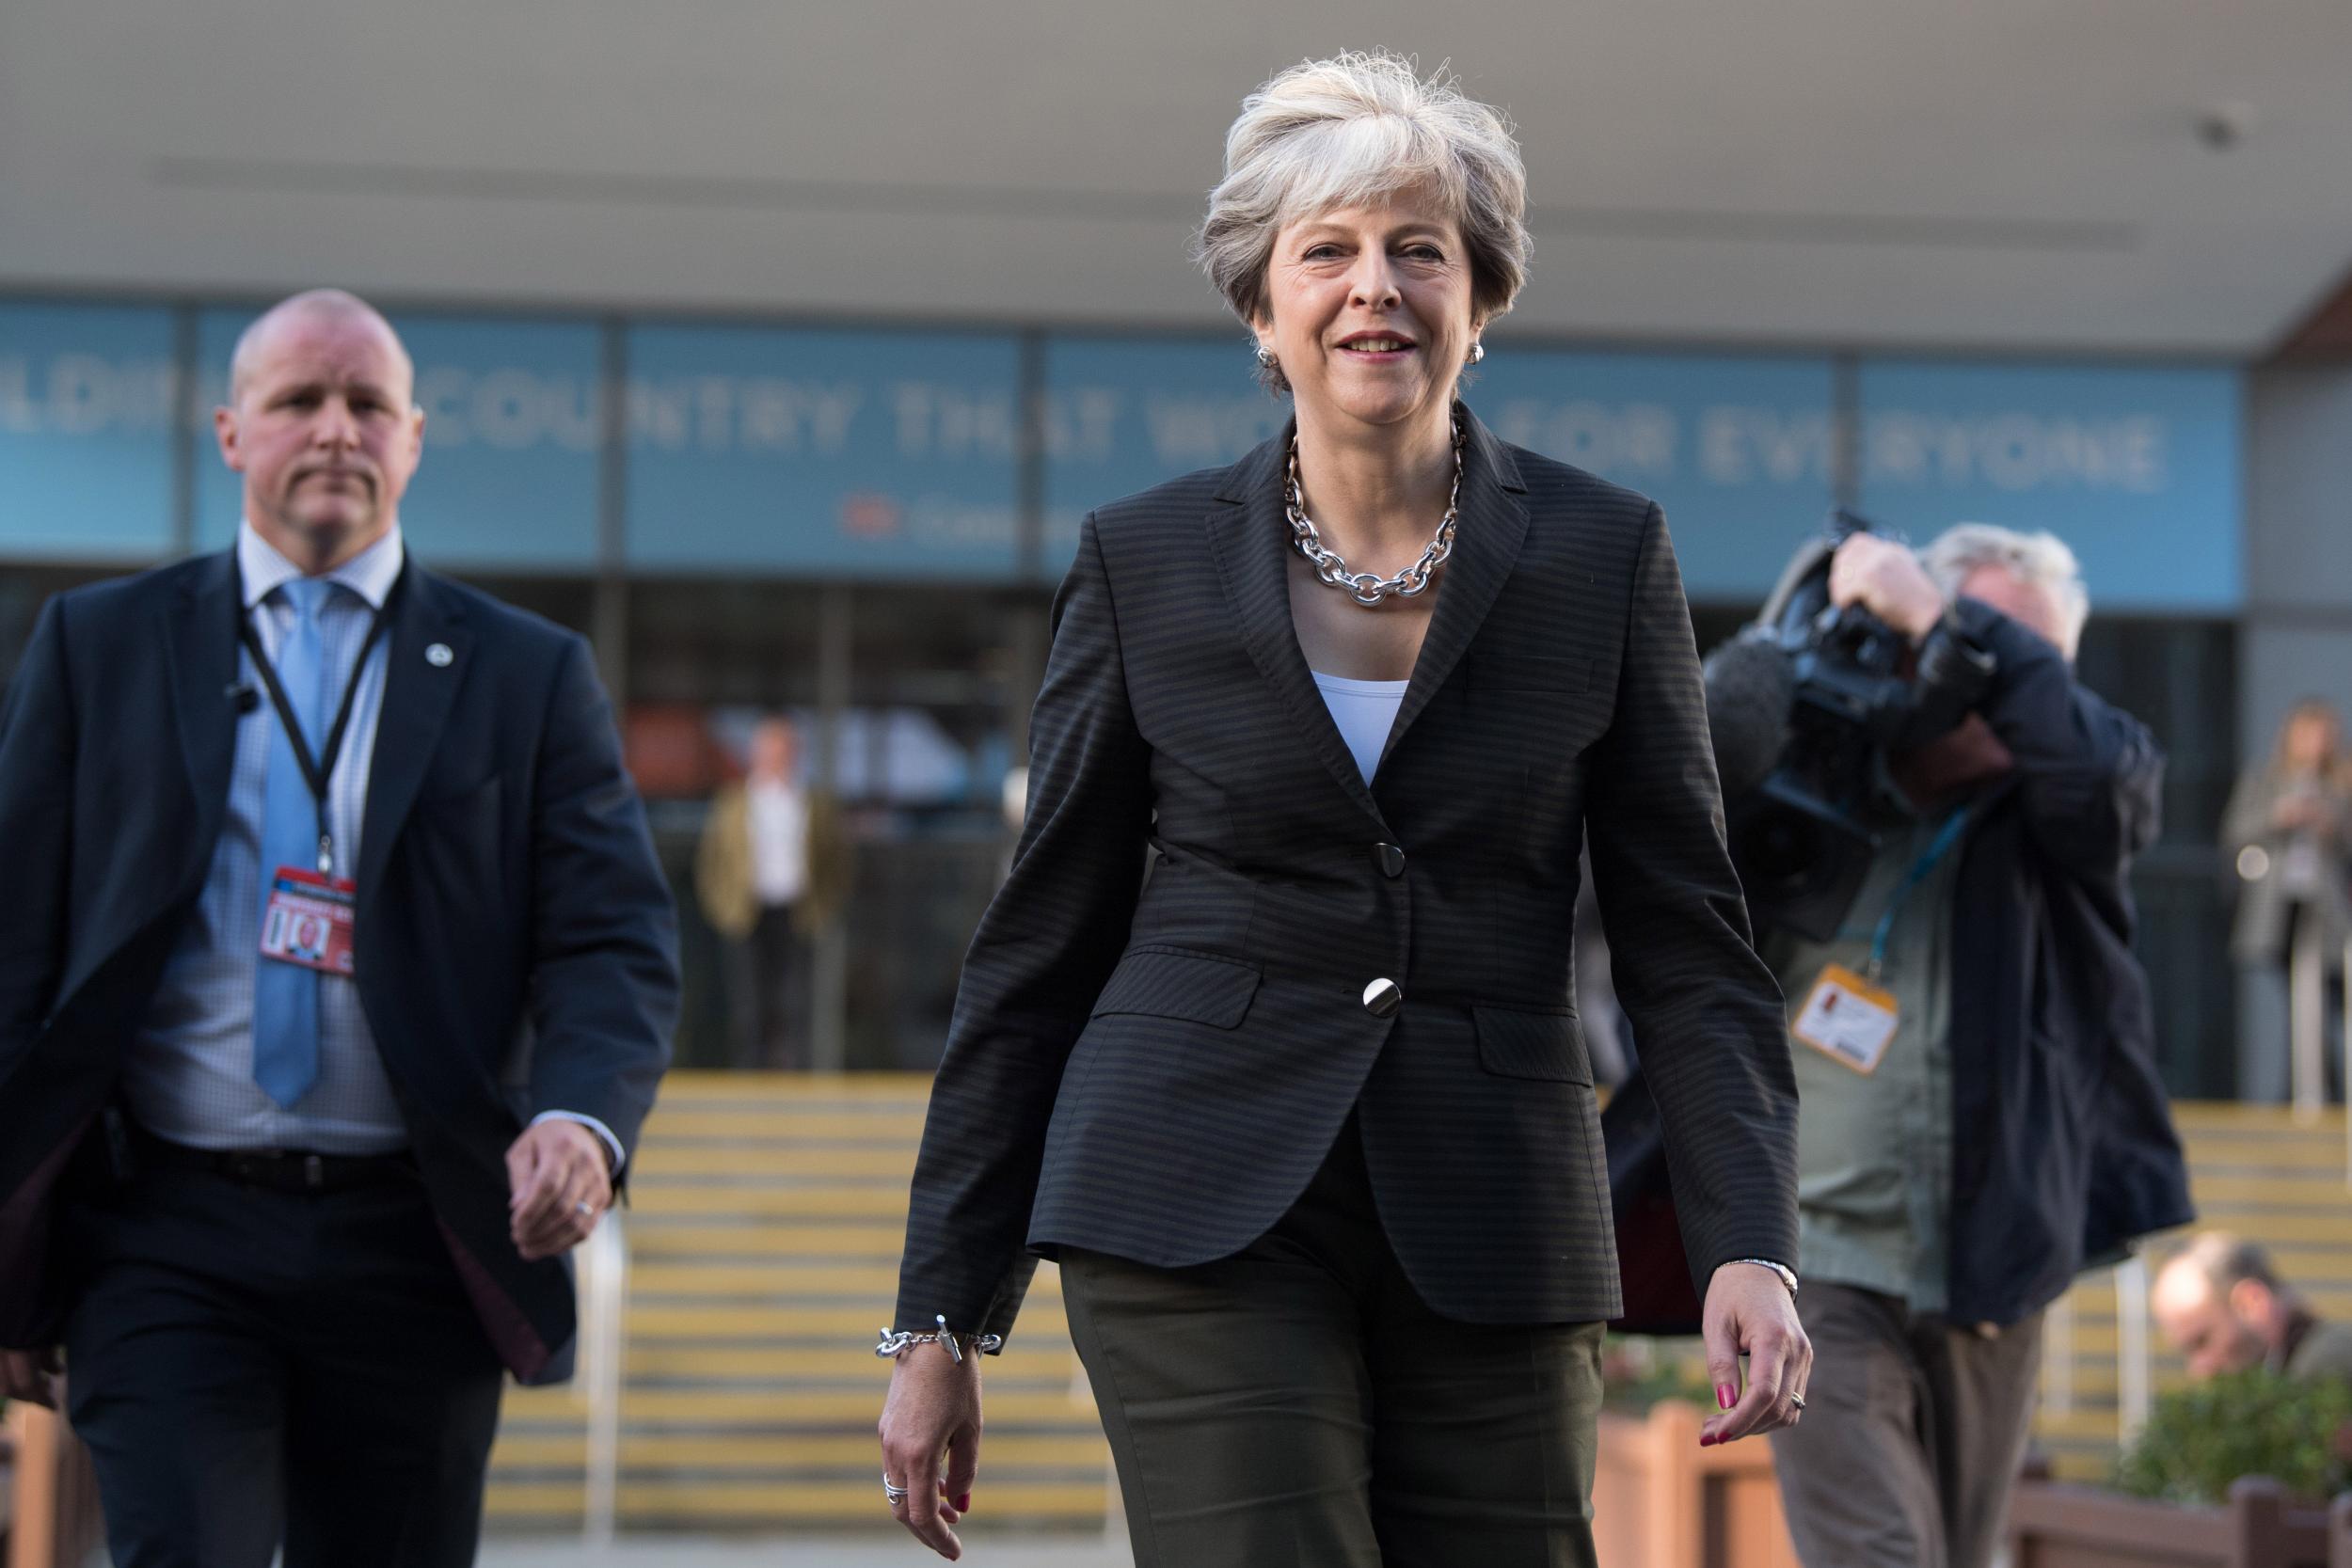 Theresa May has brushed aside claims Boris Johnson undermined her